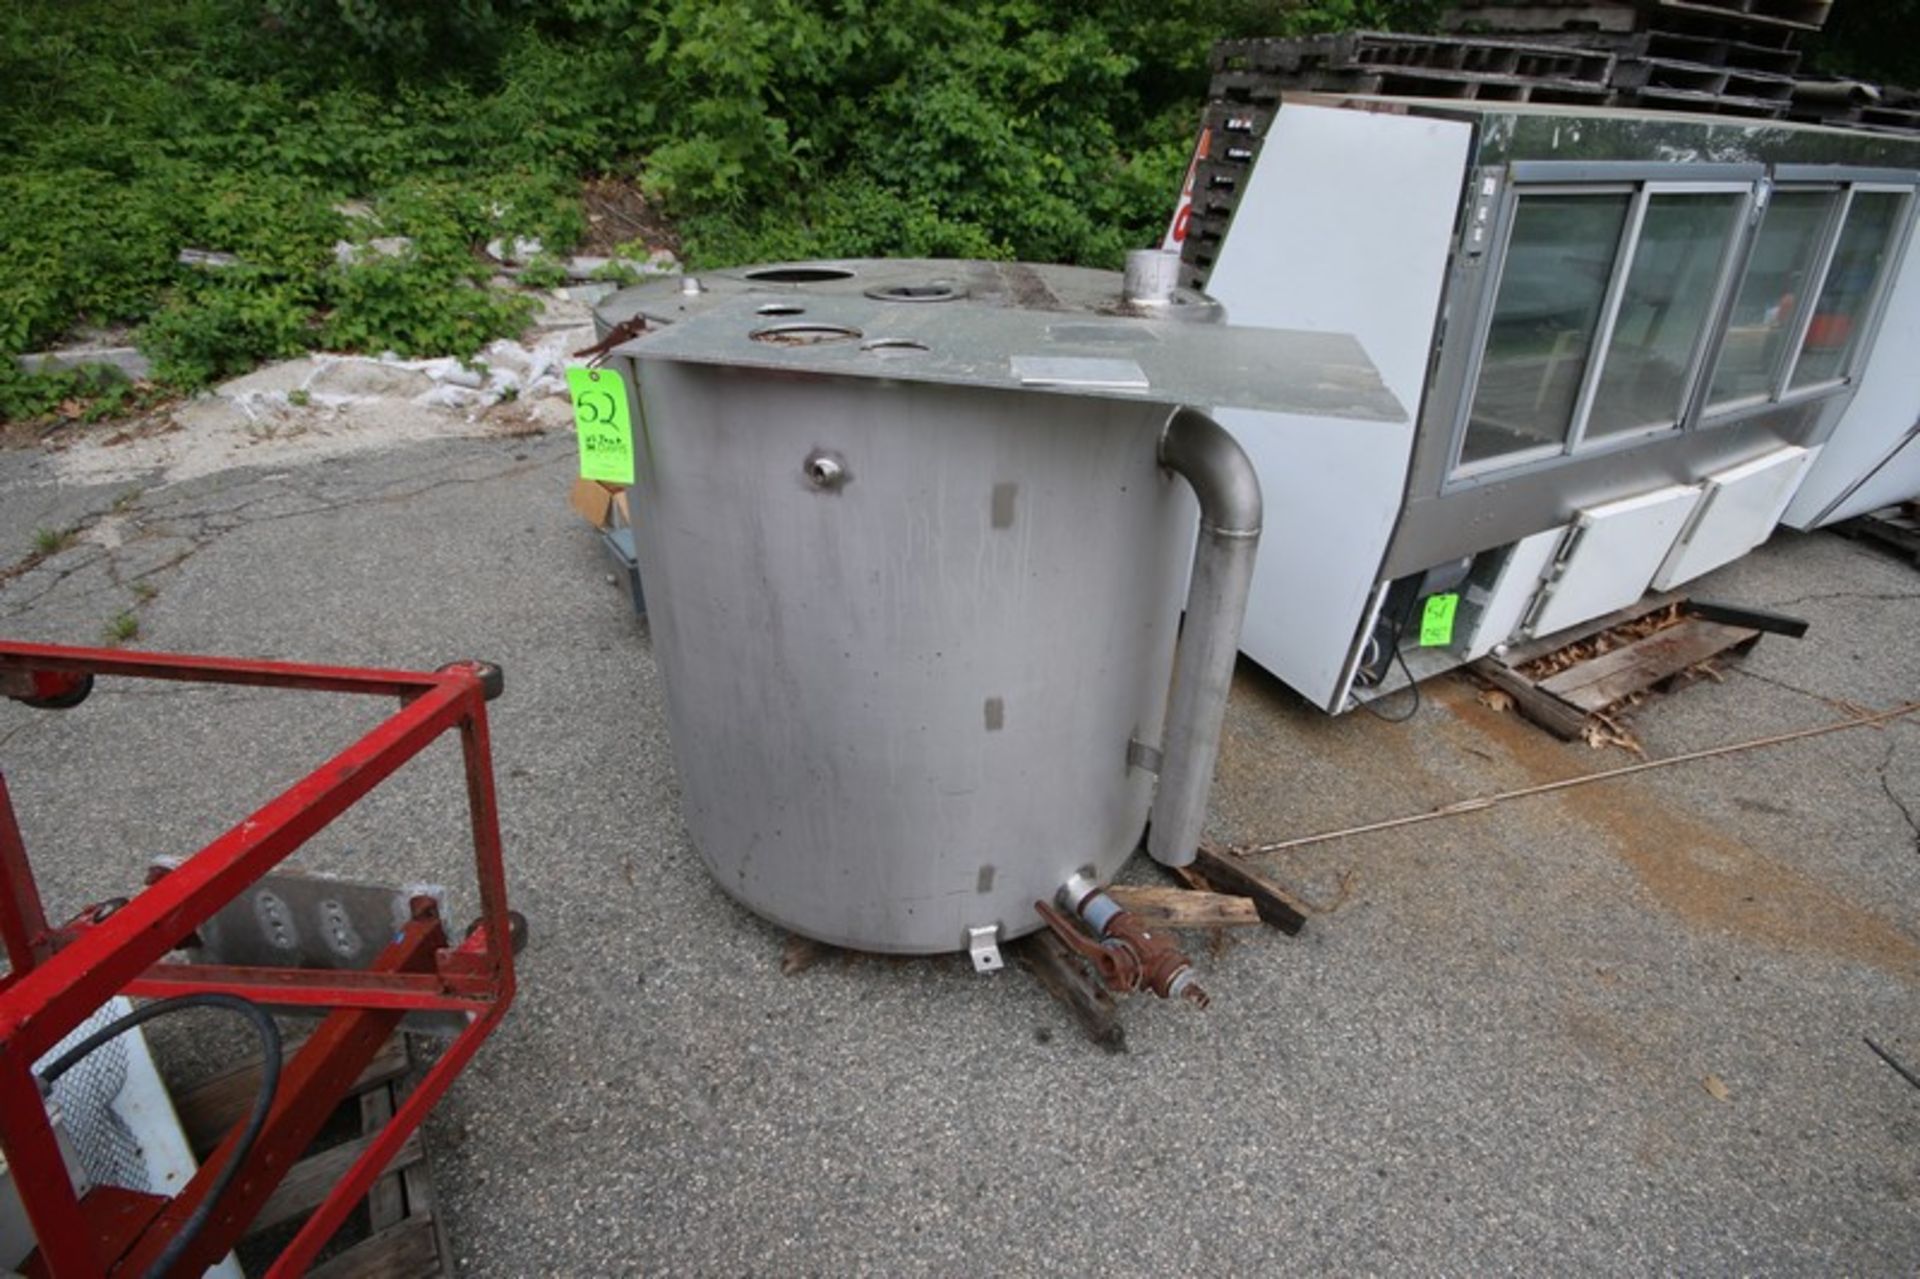 S/S Single Wall Tank, Tank Dims.: Aprox. 3 ft. 3” Tall x 3 ft. 5” Dia. with Mixer (LOCATED IN